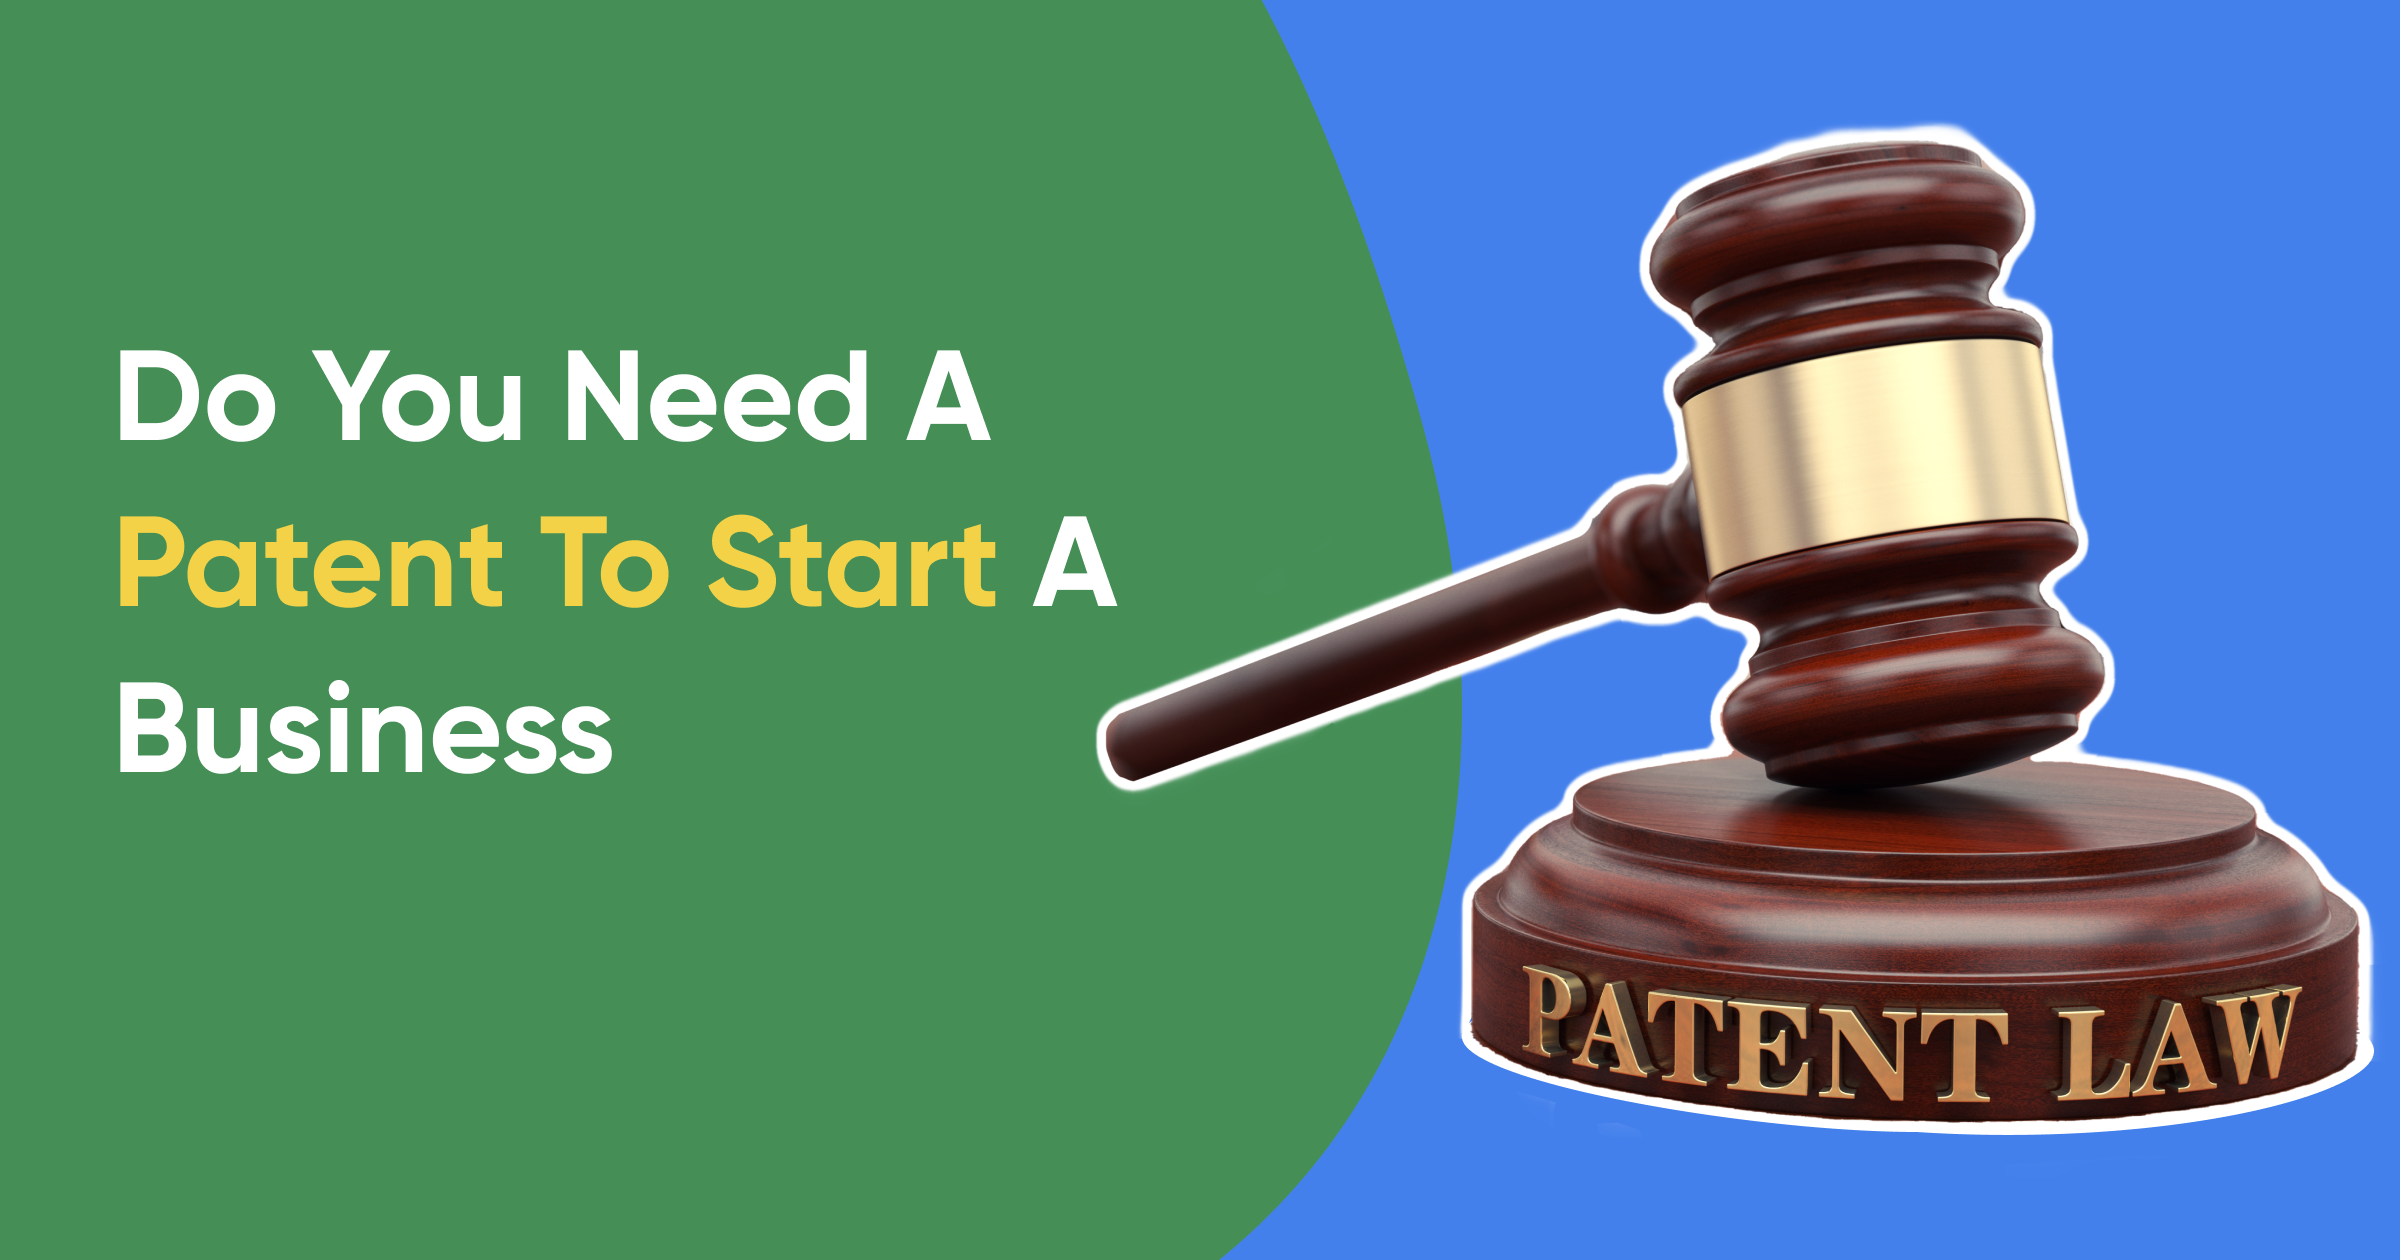 Do You Need a Patent to Start a Business?